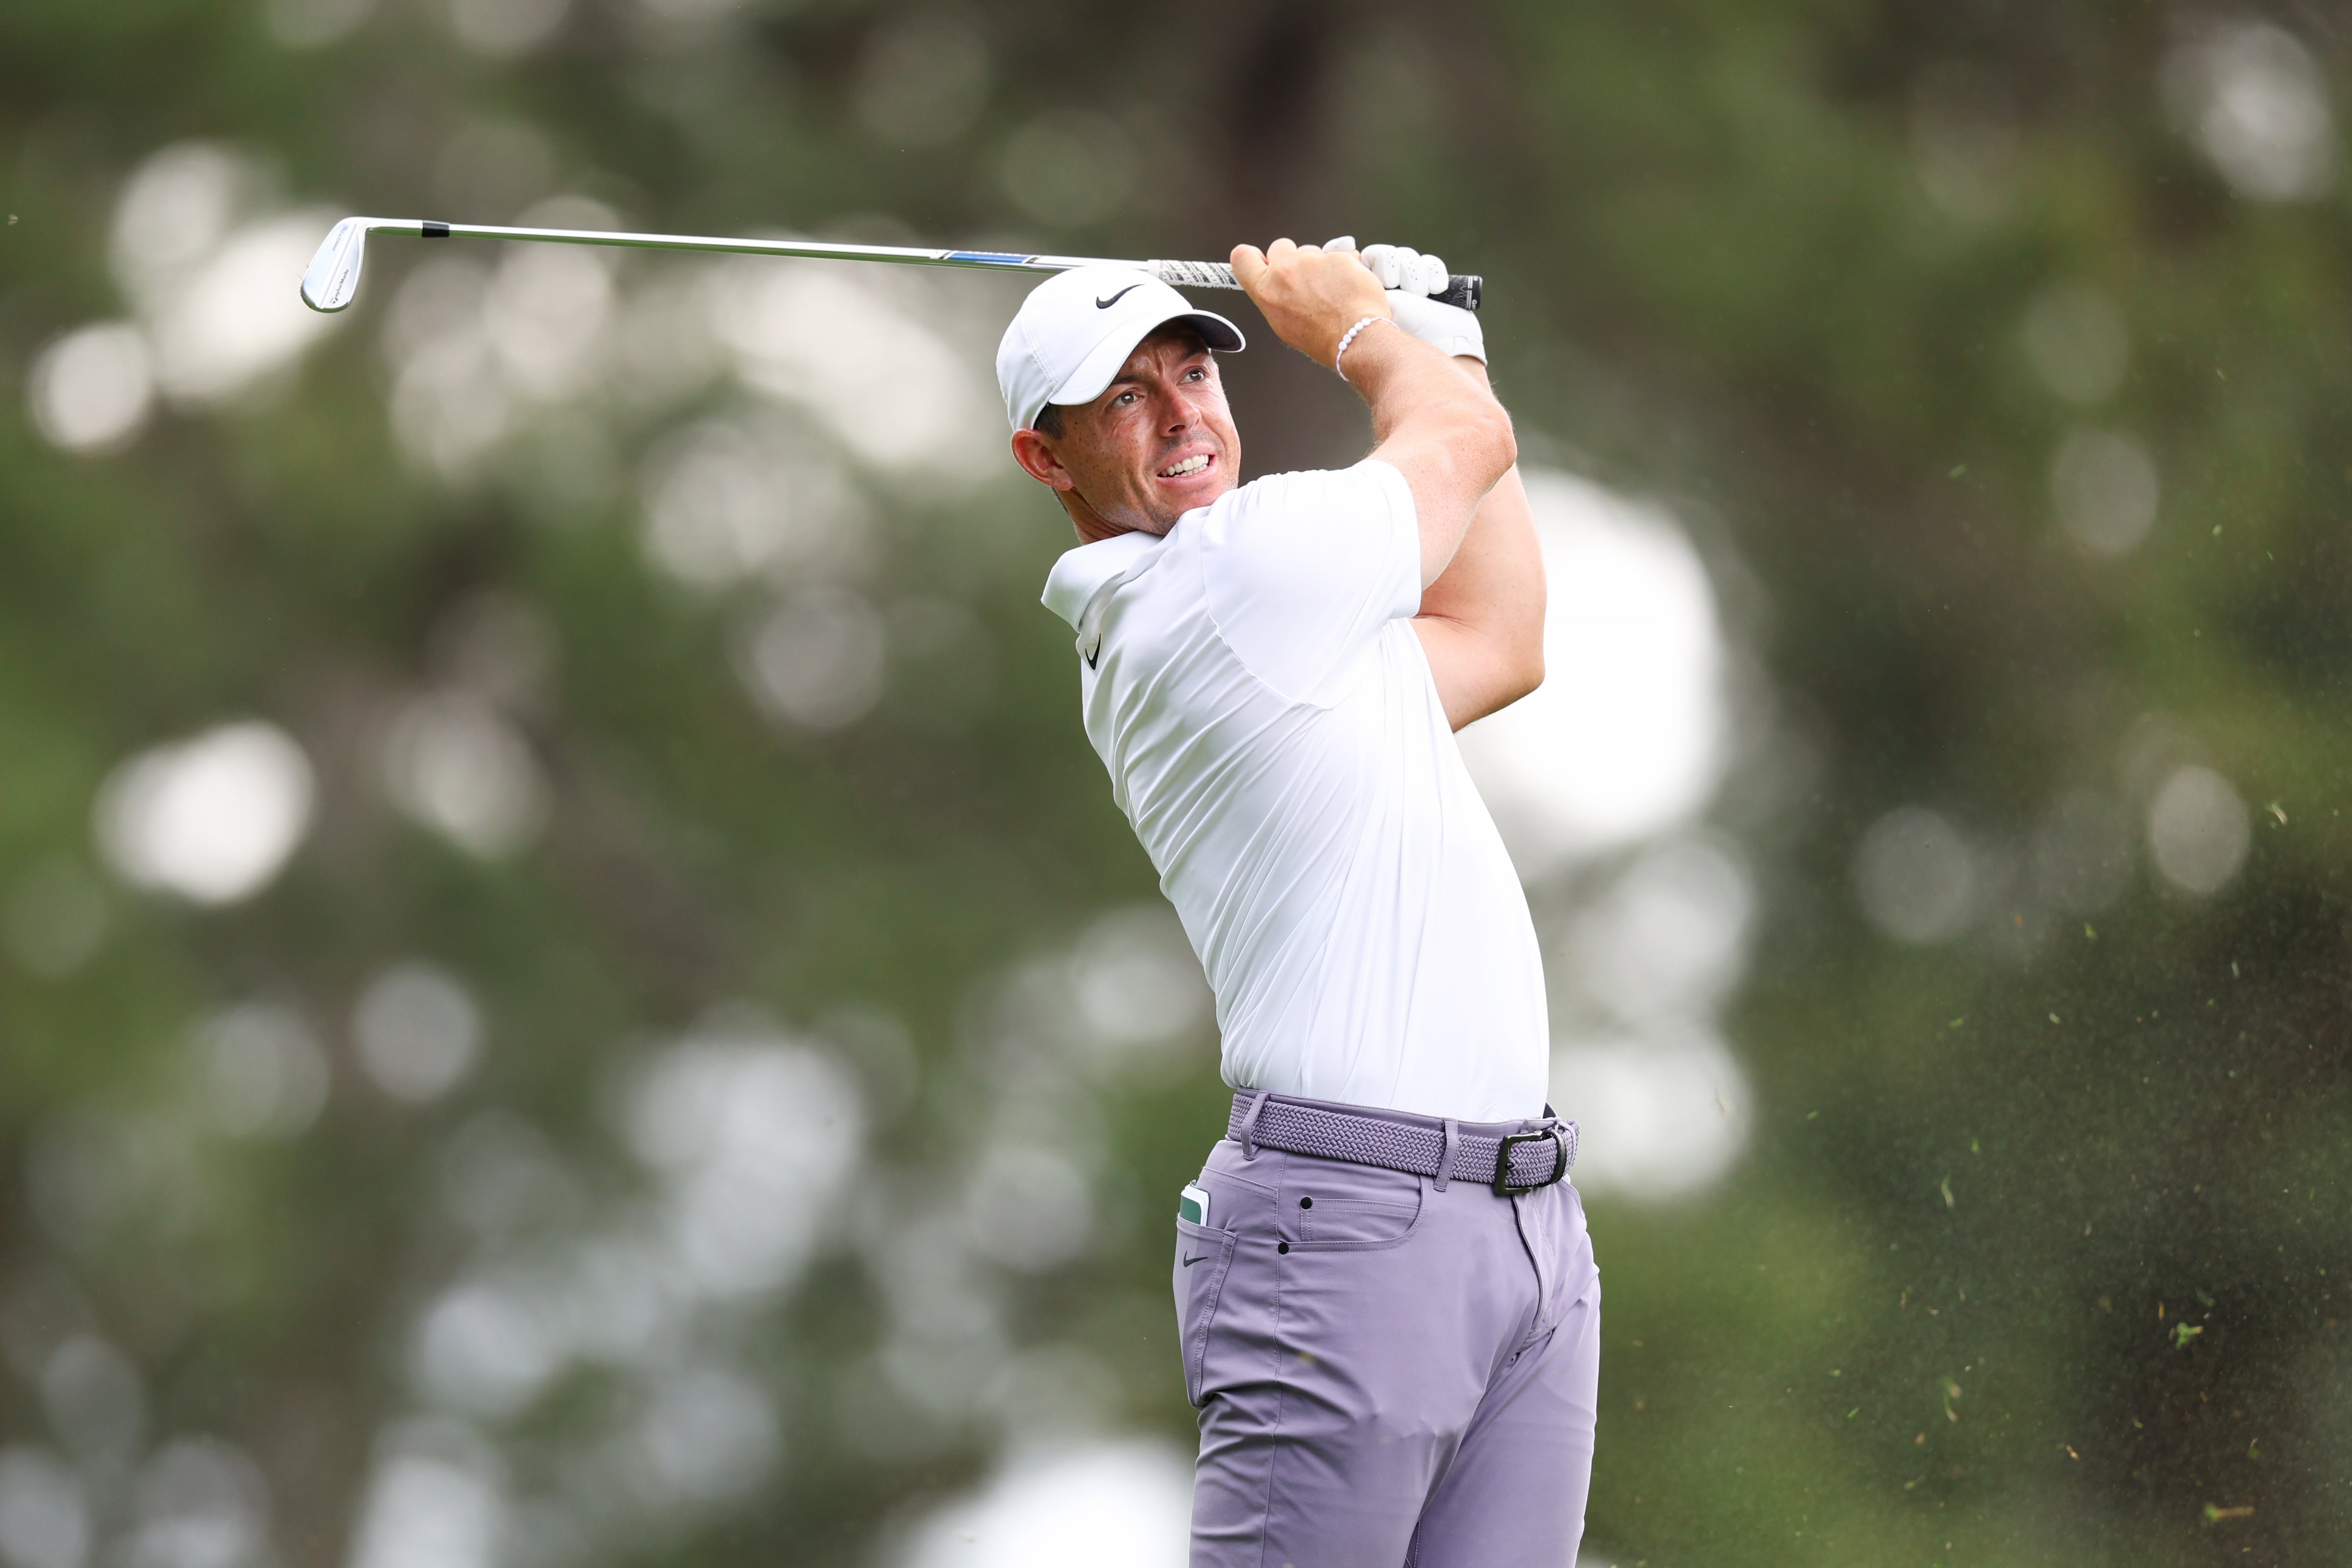 Rory McIlroy finished one under par after round one